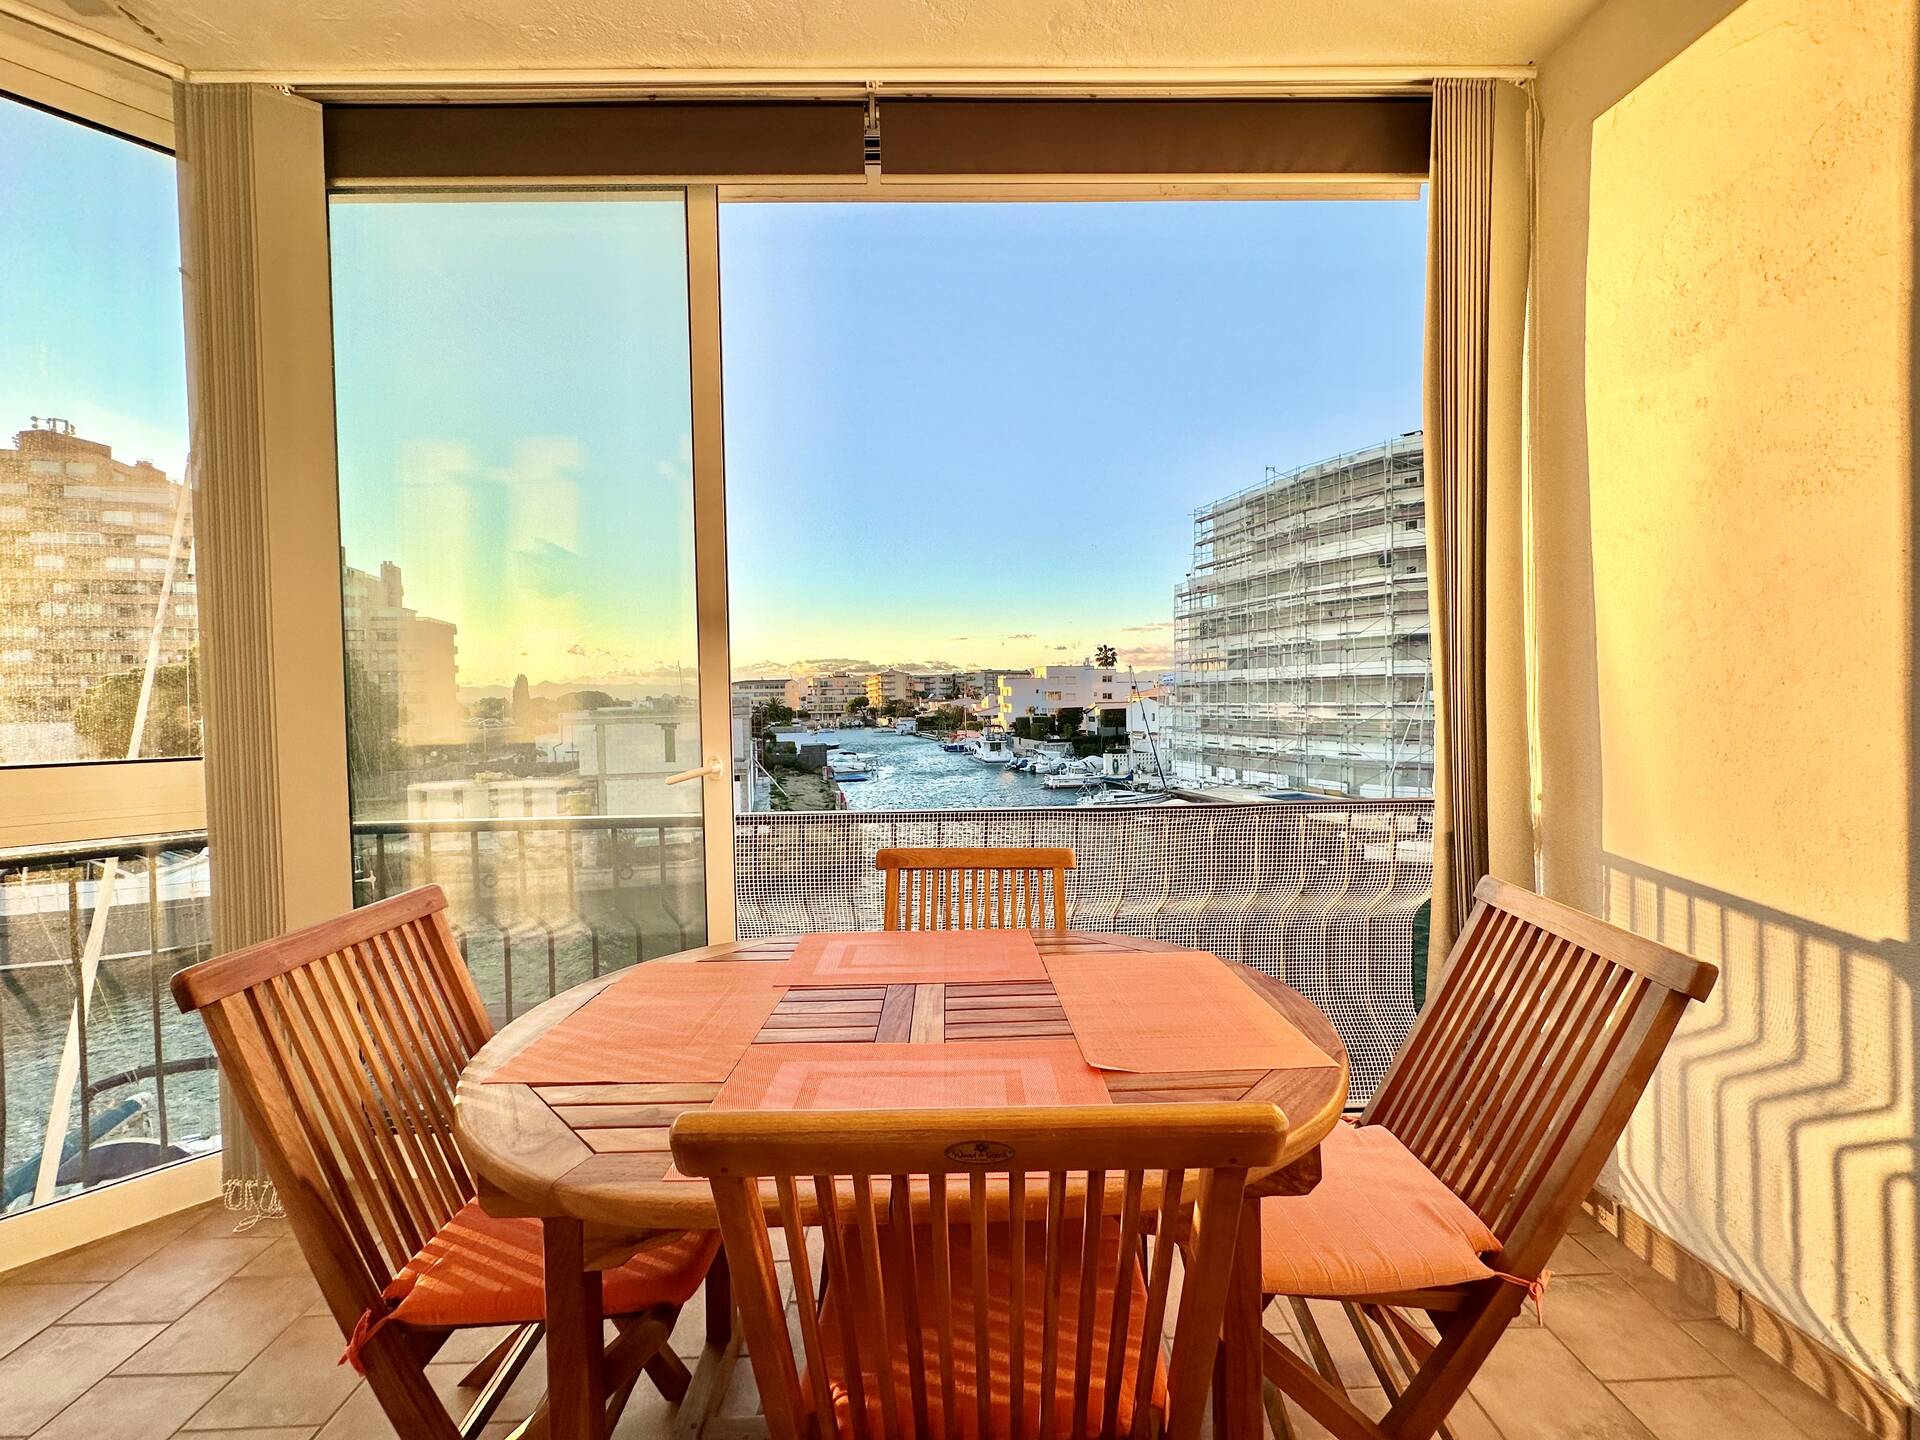 Superb apartment with view of the canal, close to the beach of Santa Margarita